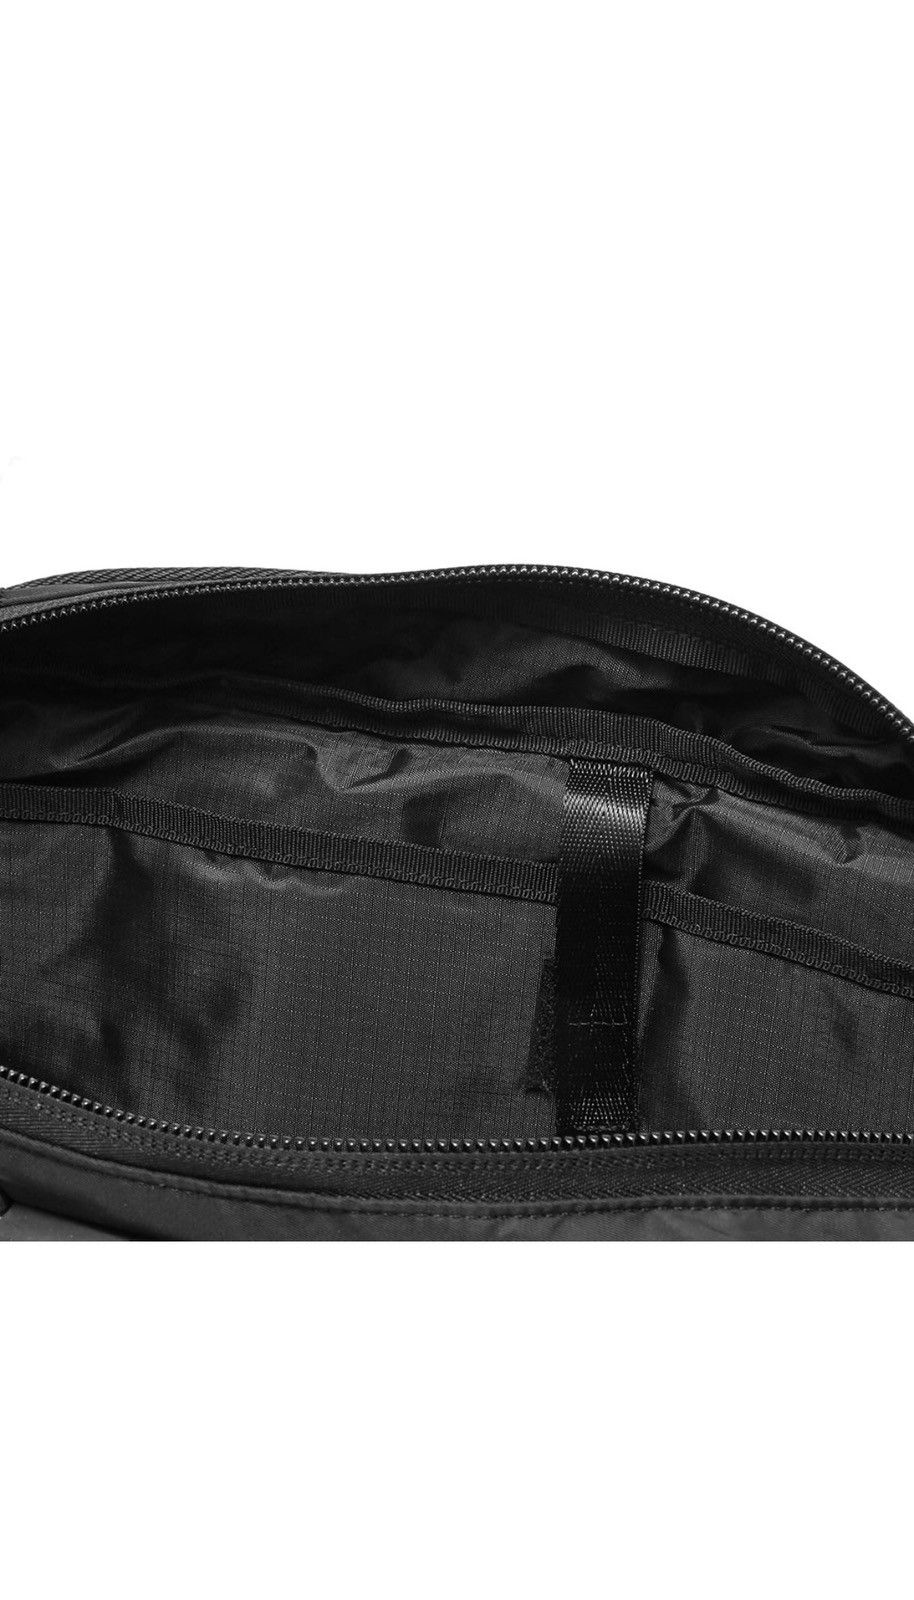 Japanese Brand Indispensable Econyl Snug Sling Bag Size ONE SIZE - 5 Preview